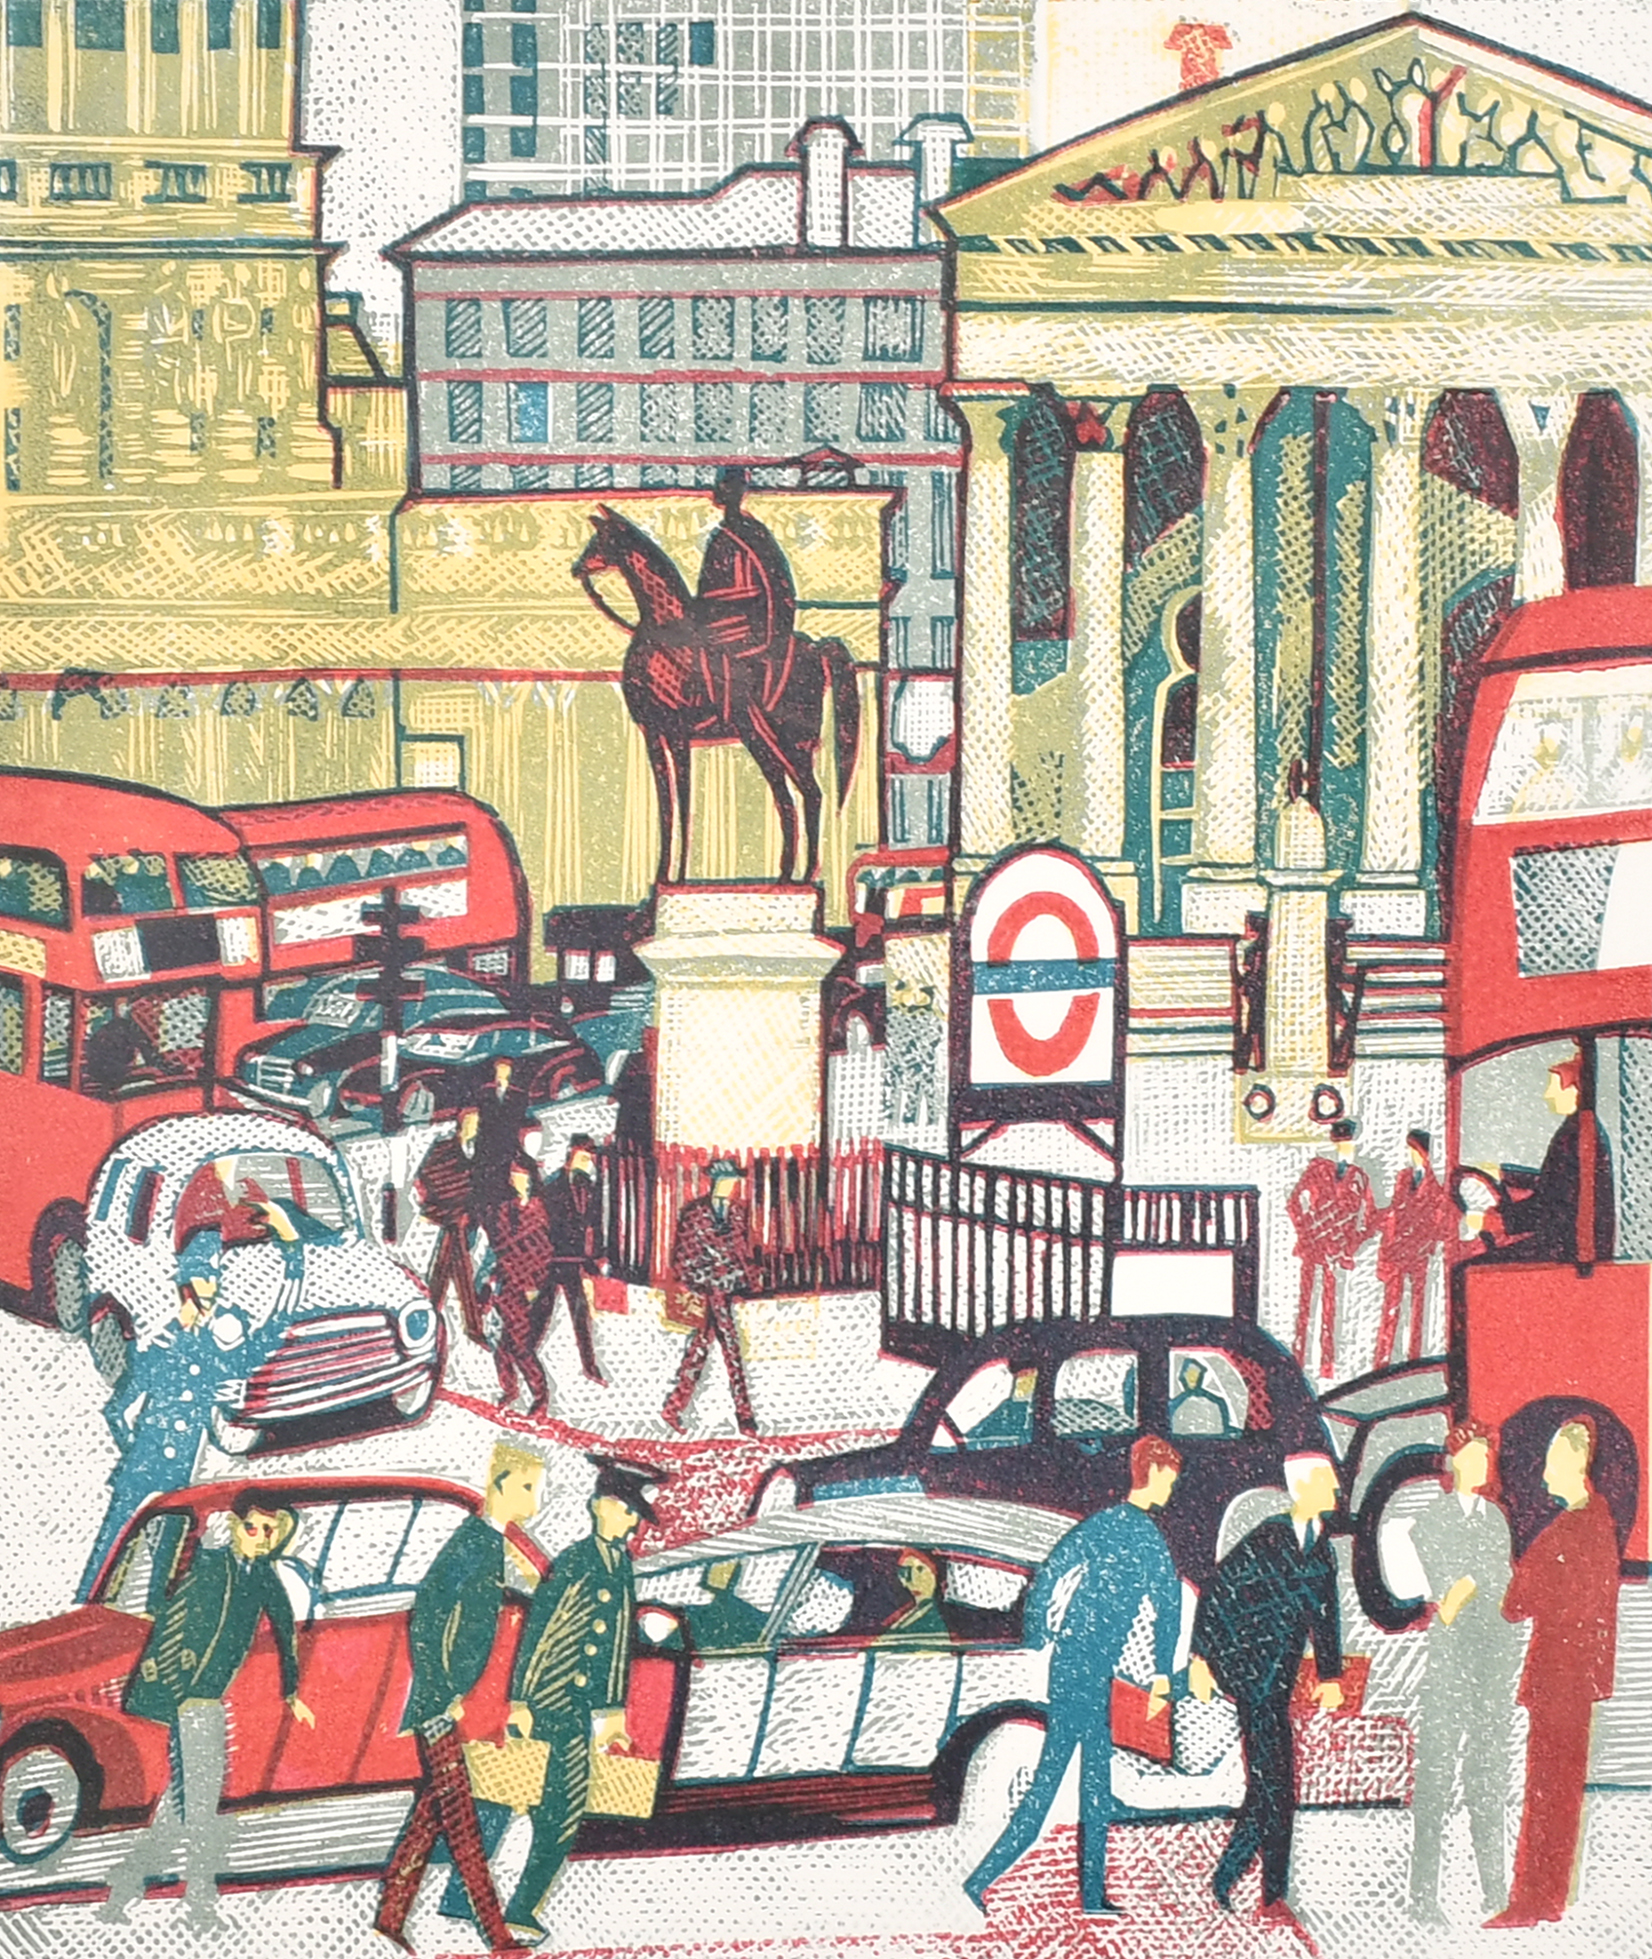 Rupert Shephard (1909-1992) British. "Royal Exchange", Lithograph, Signed, inscribed and numbered